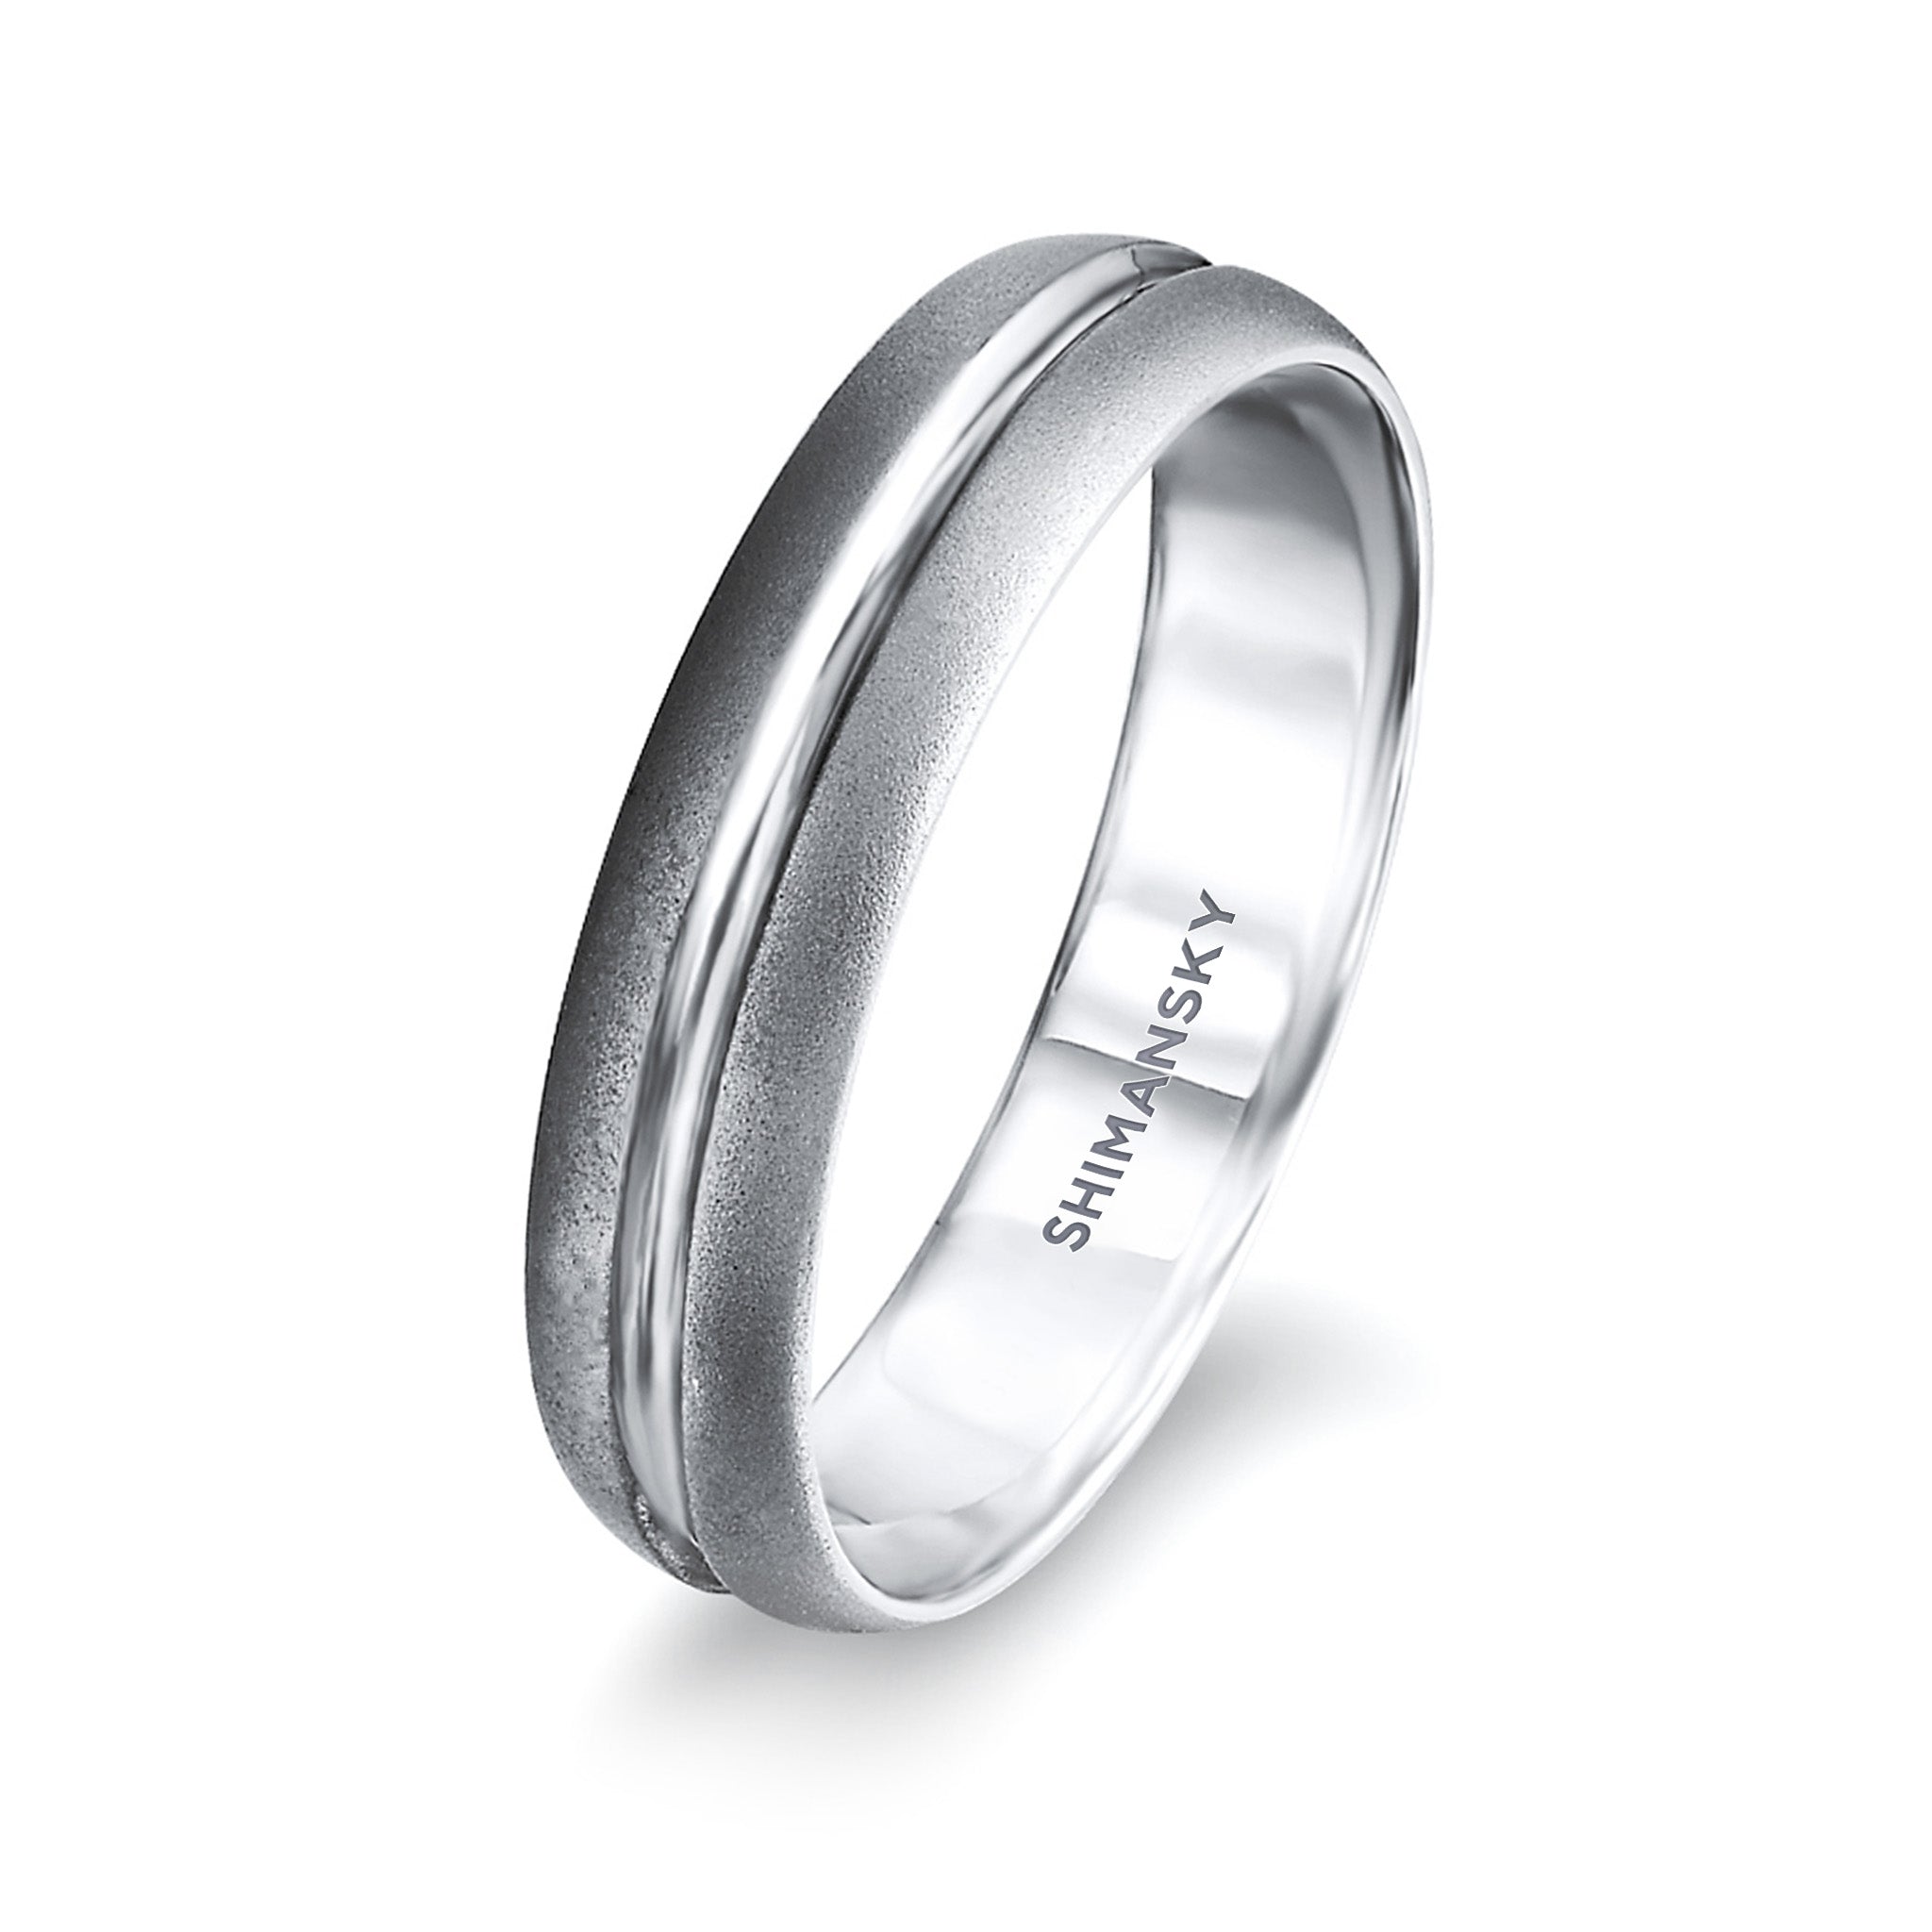 Shimansky - Max-line Single Groove Rounded Wedding Band in Brushed 18K White Gold